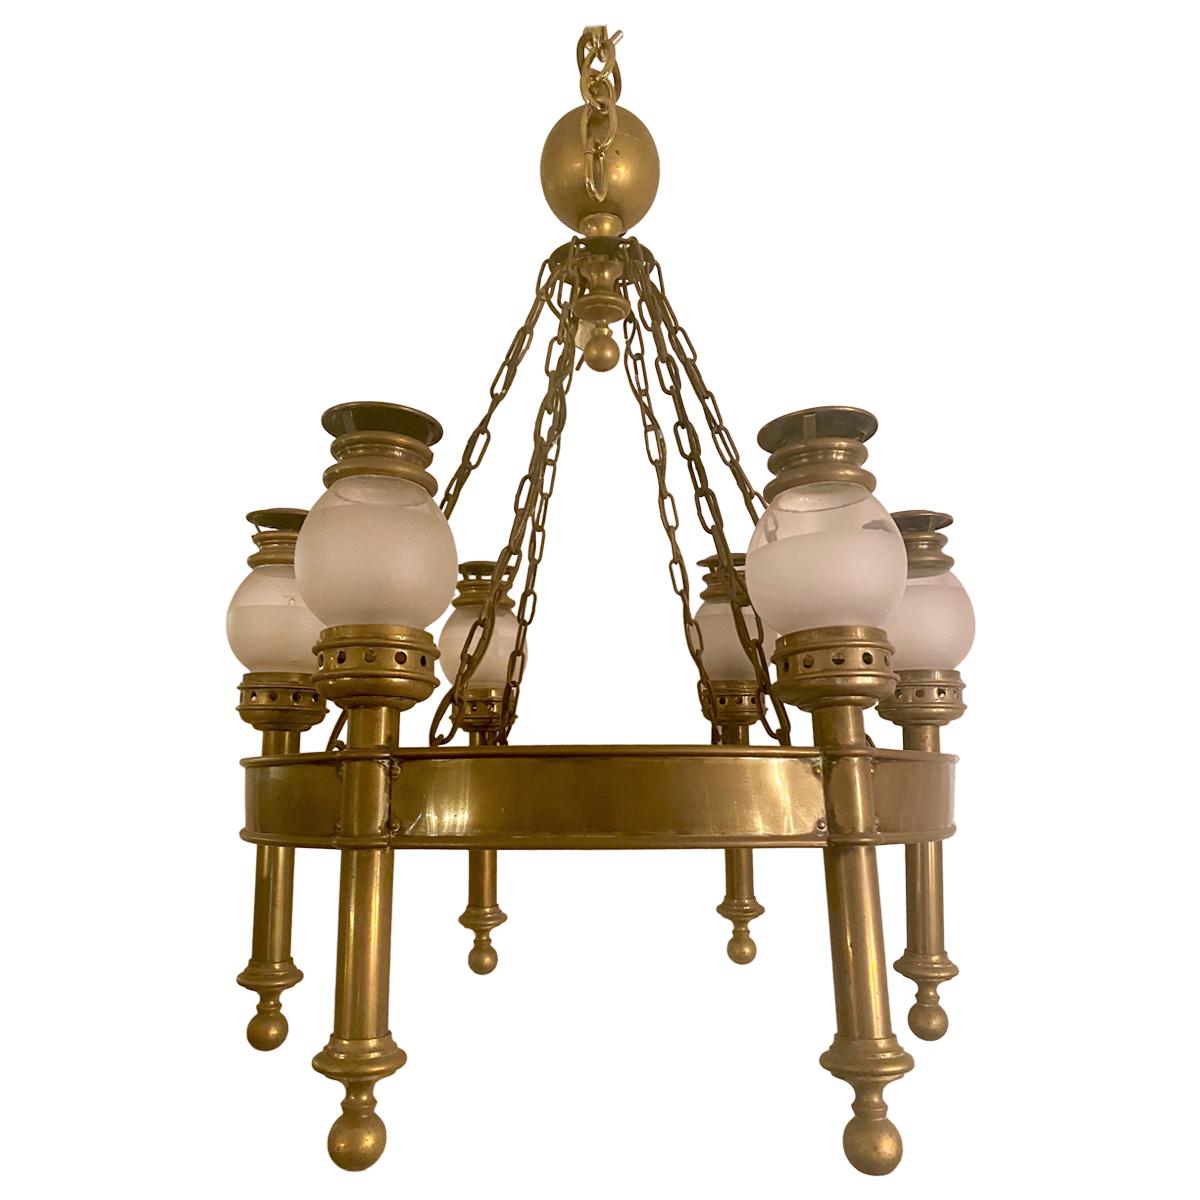 Antique Bronze Chandelier from David Adler Home, Lake Forest IL, Circa 1920-1930 For Sale